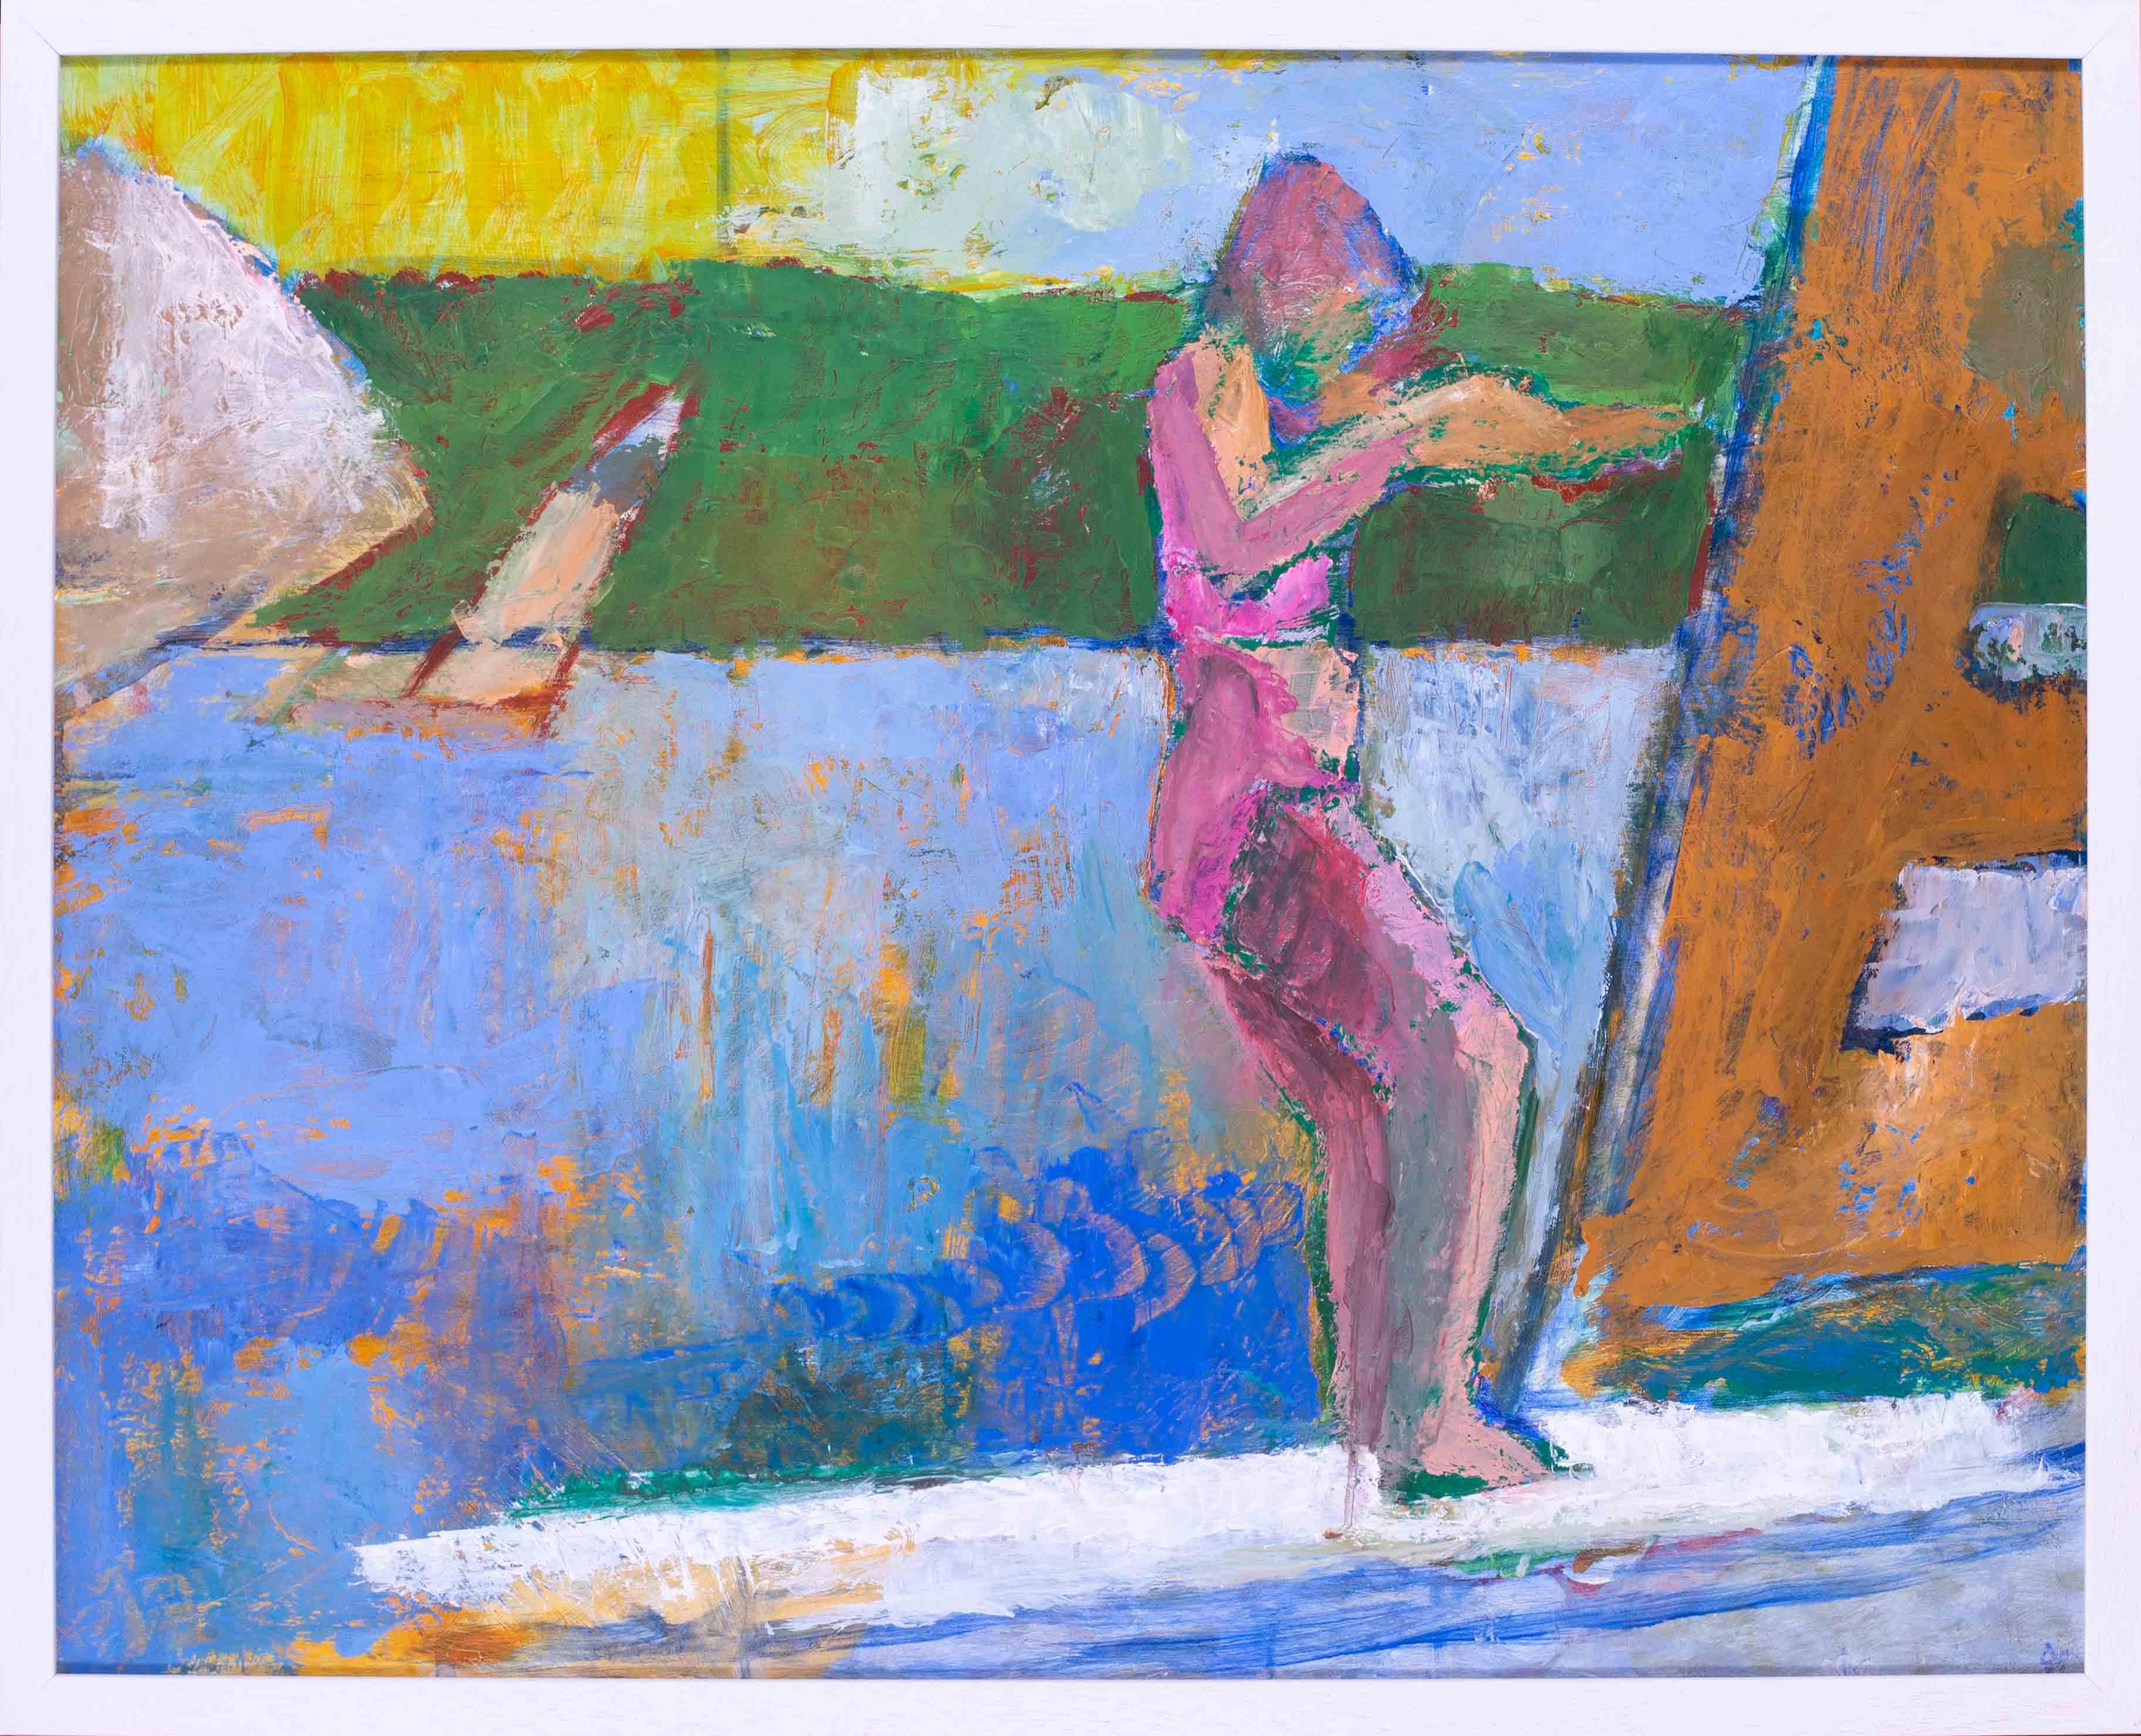 Windsurfing with girl in pink, 1986 Modern British oil painting by Ewart Johns